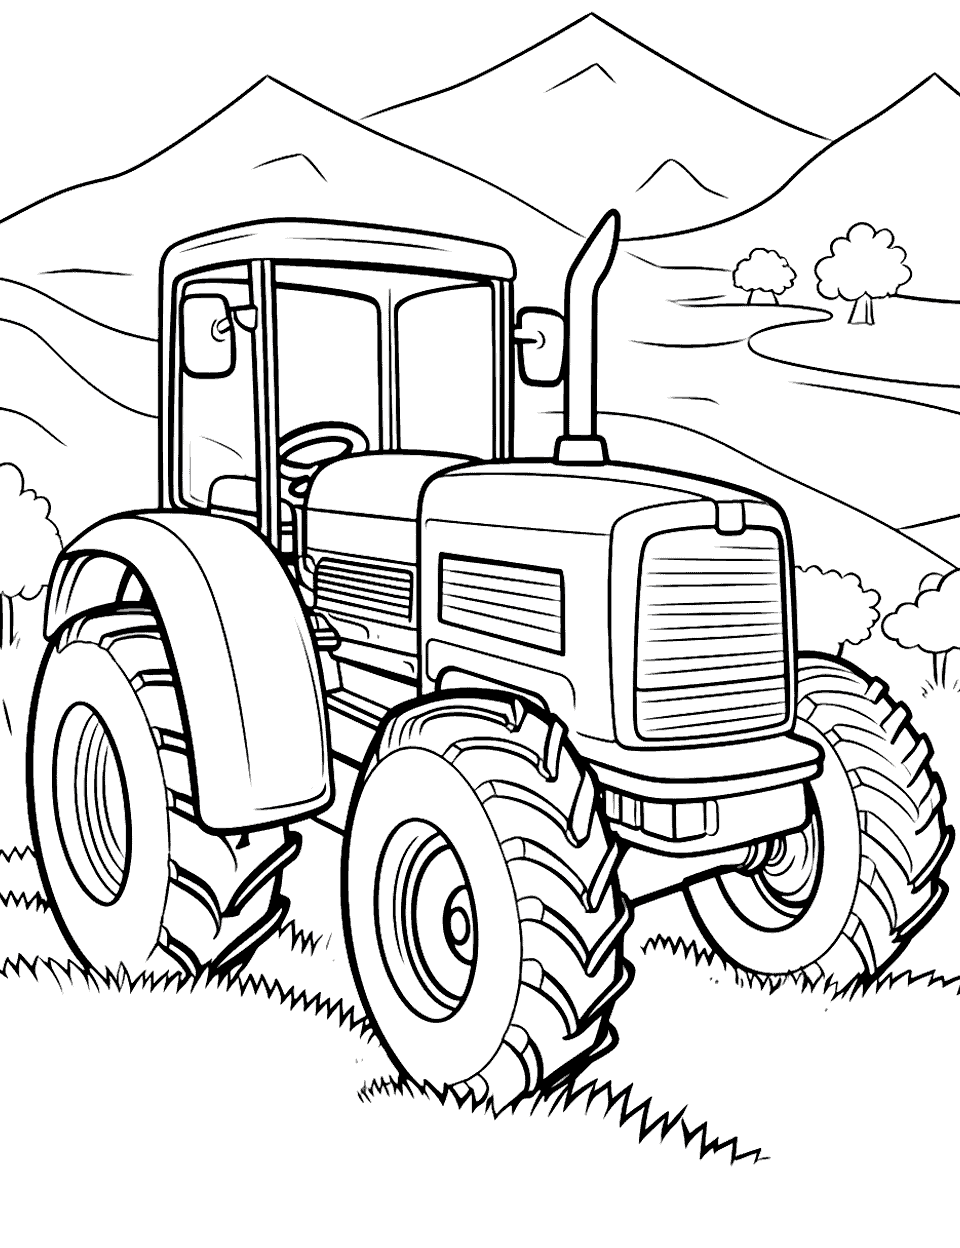 Tractor at Early Morning Coloring Page - A tractor depicted in the early morning work shift.